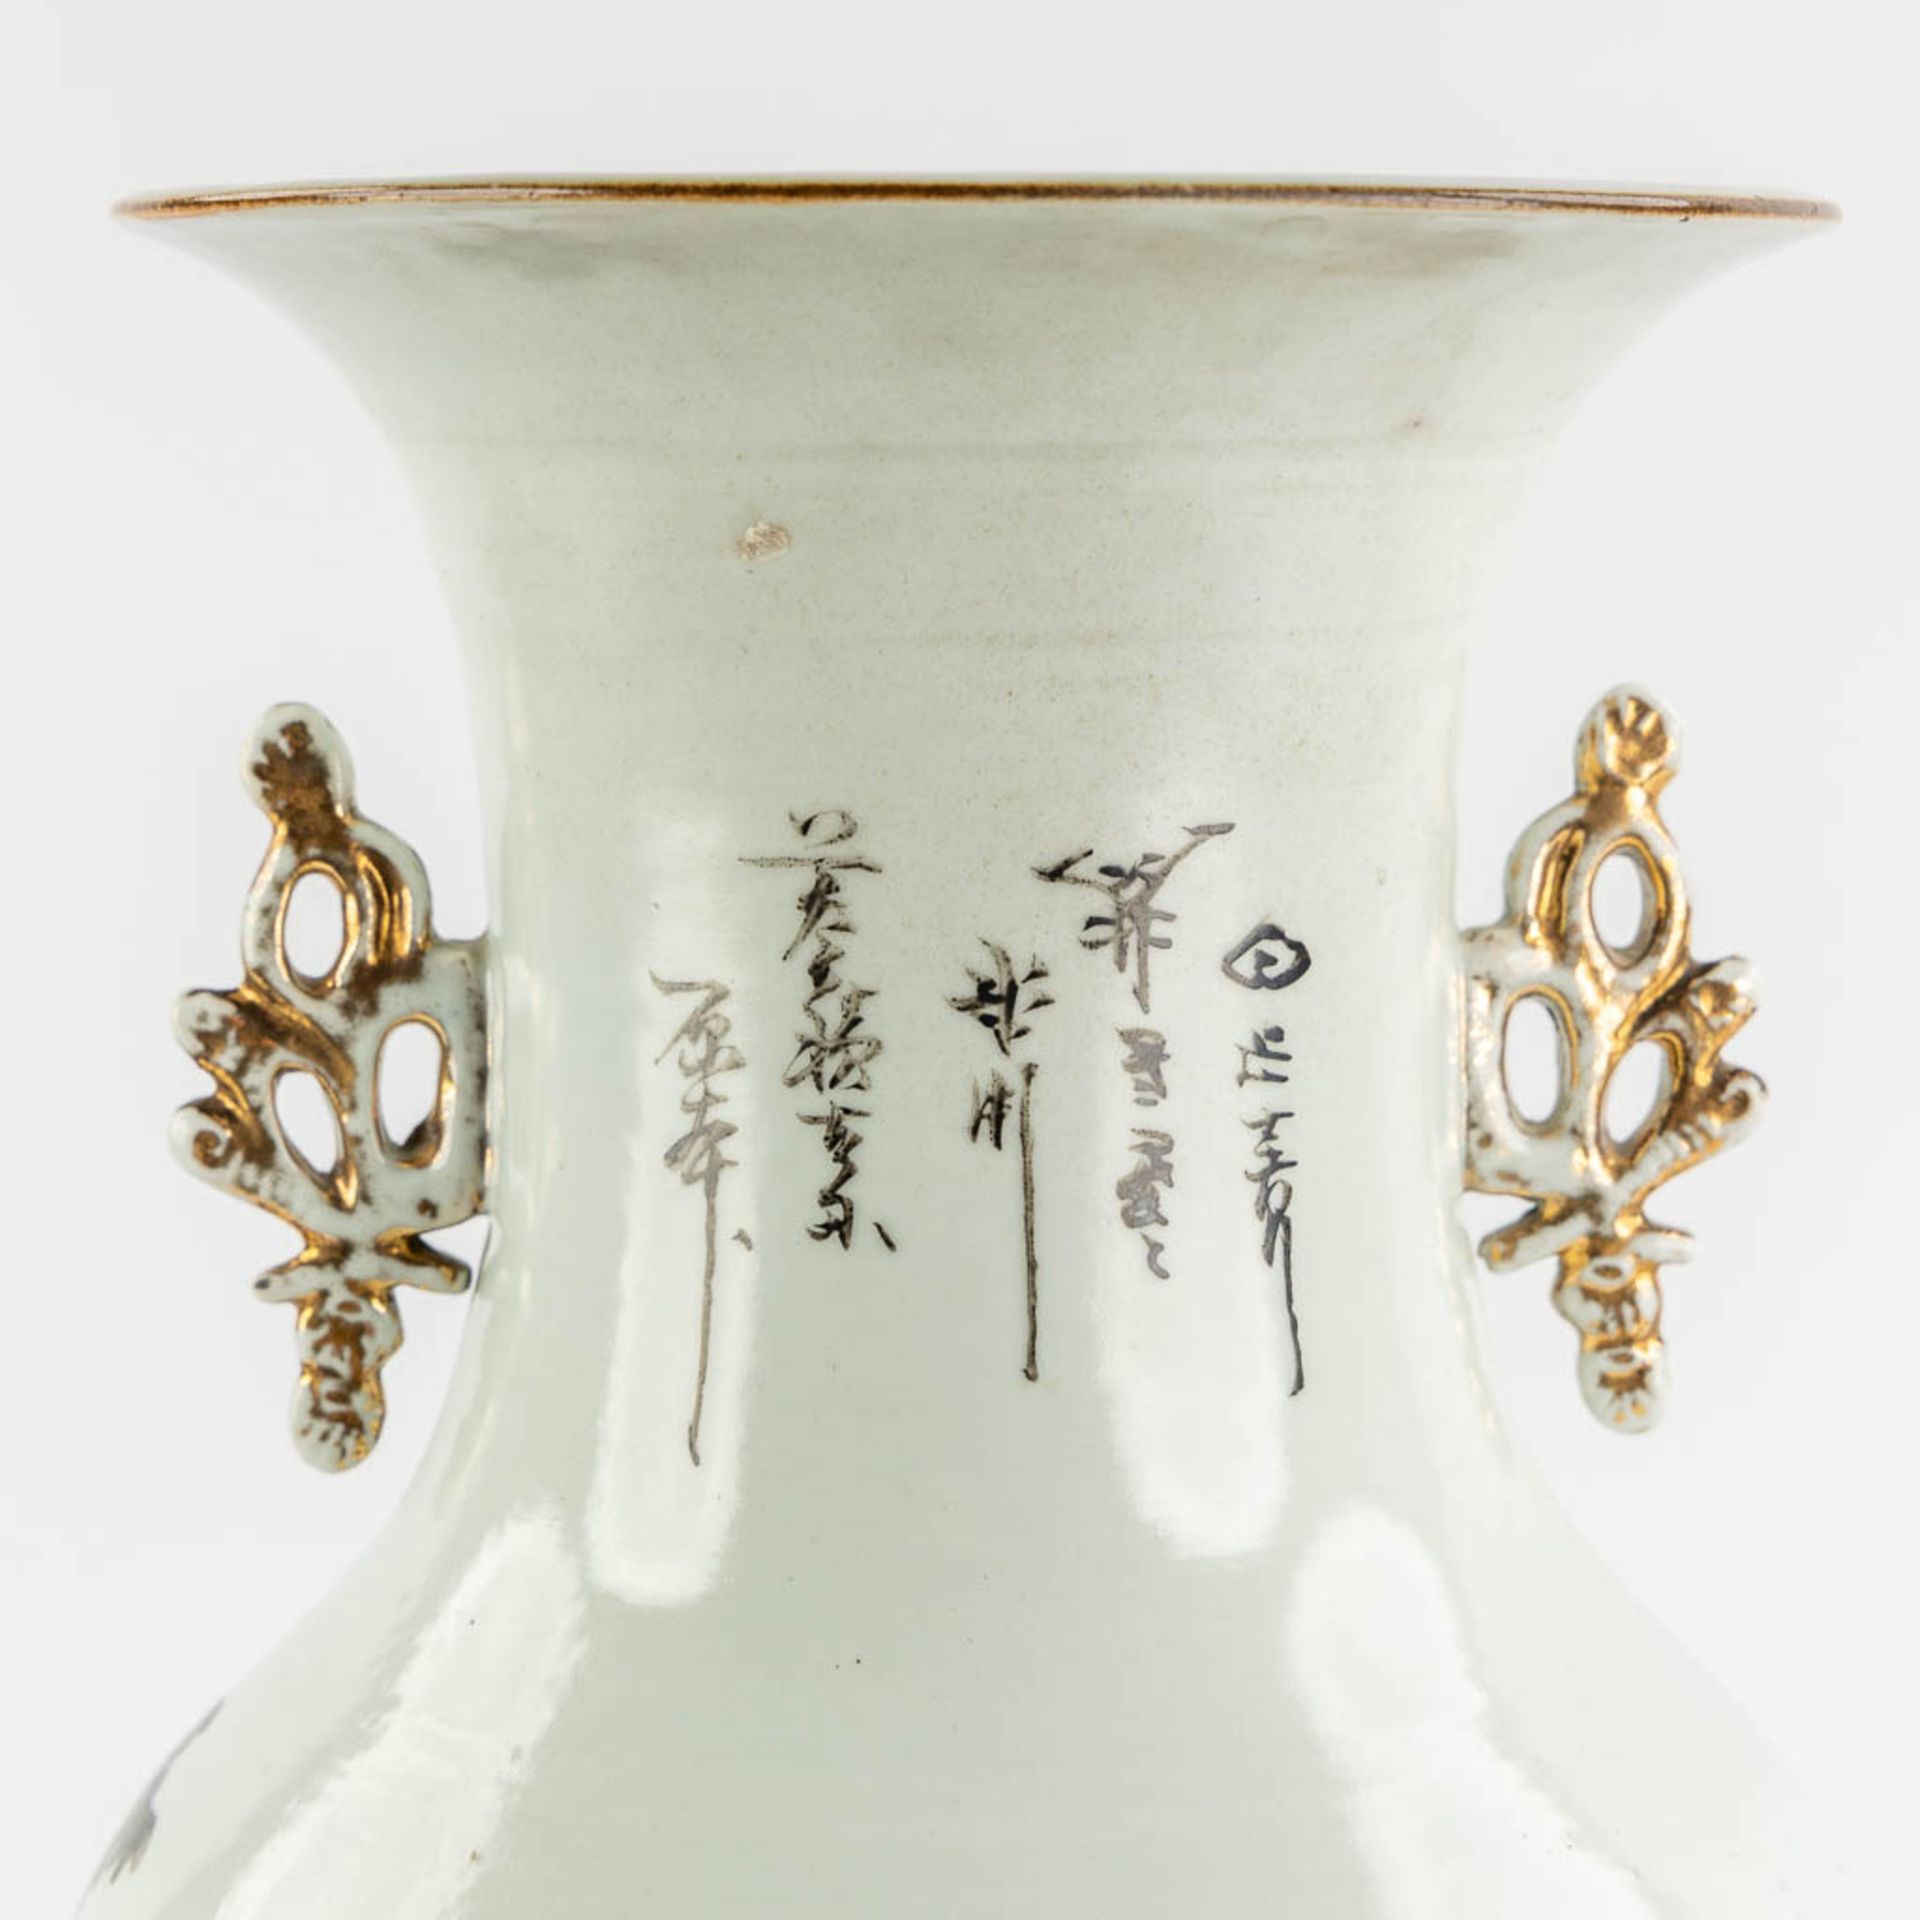 Two Chinese Famille Rose vases decorated with figurines. 19th/20th C. (H:58 x D:23 cm) - Image 14 of 15